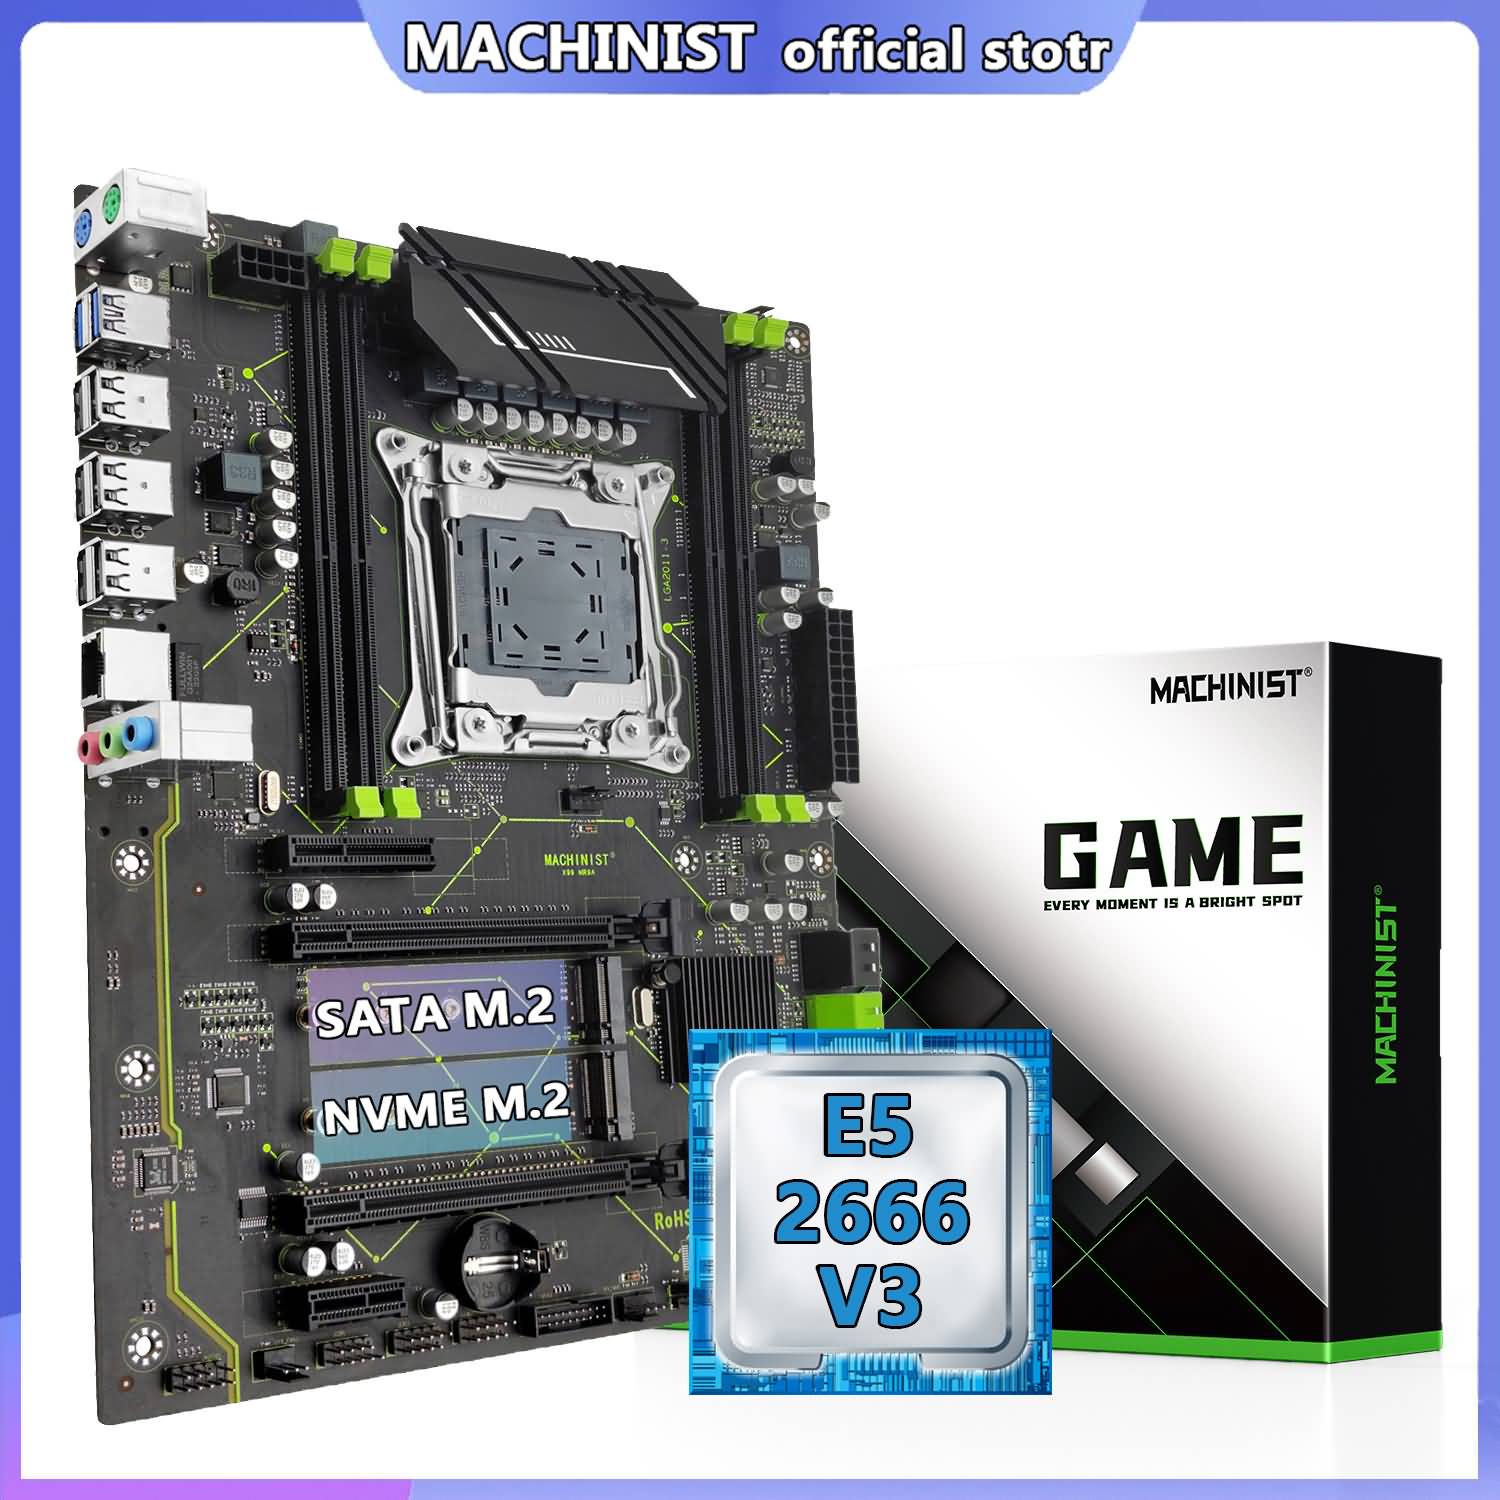 Buy Machinist Kit X99 Motherboard With Xeon E5 2666 V3 Cpu Online